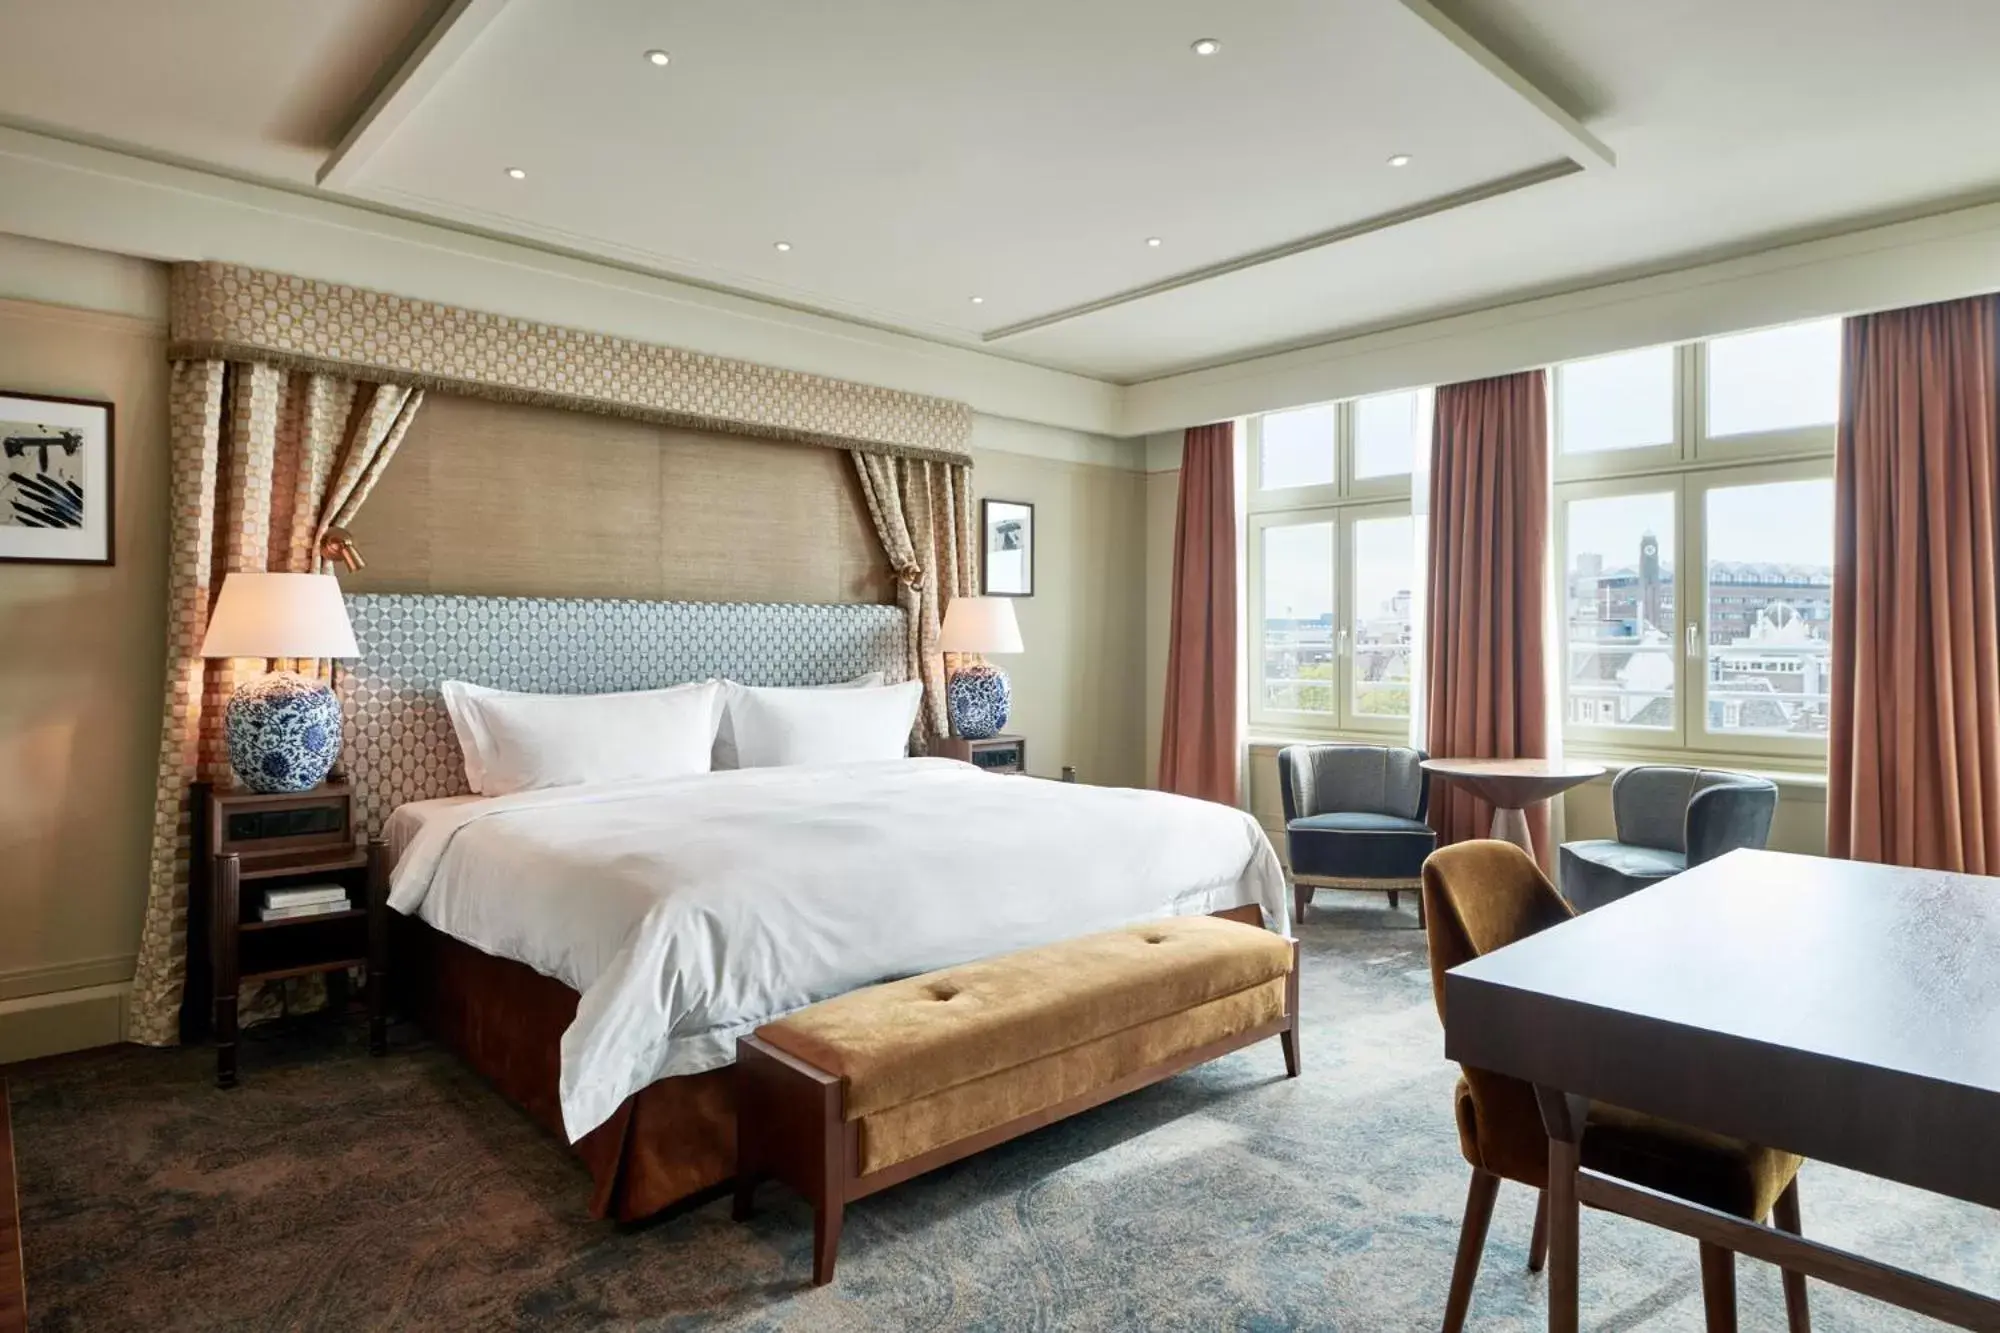 Bedroom in De L’Europe Amsterdam – The Leading Hotels of the World